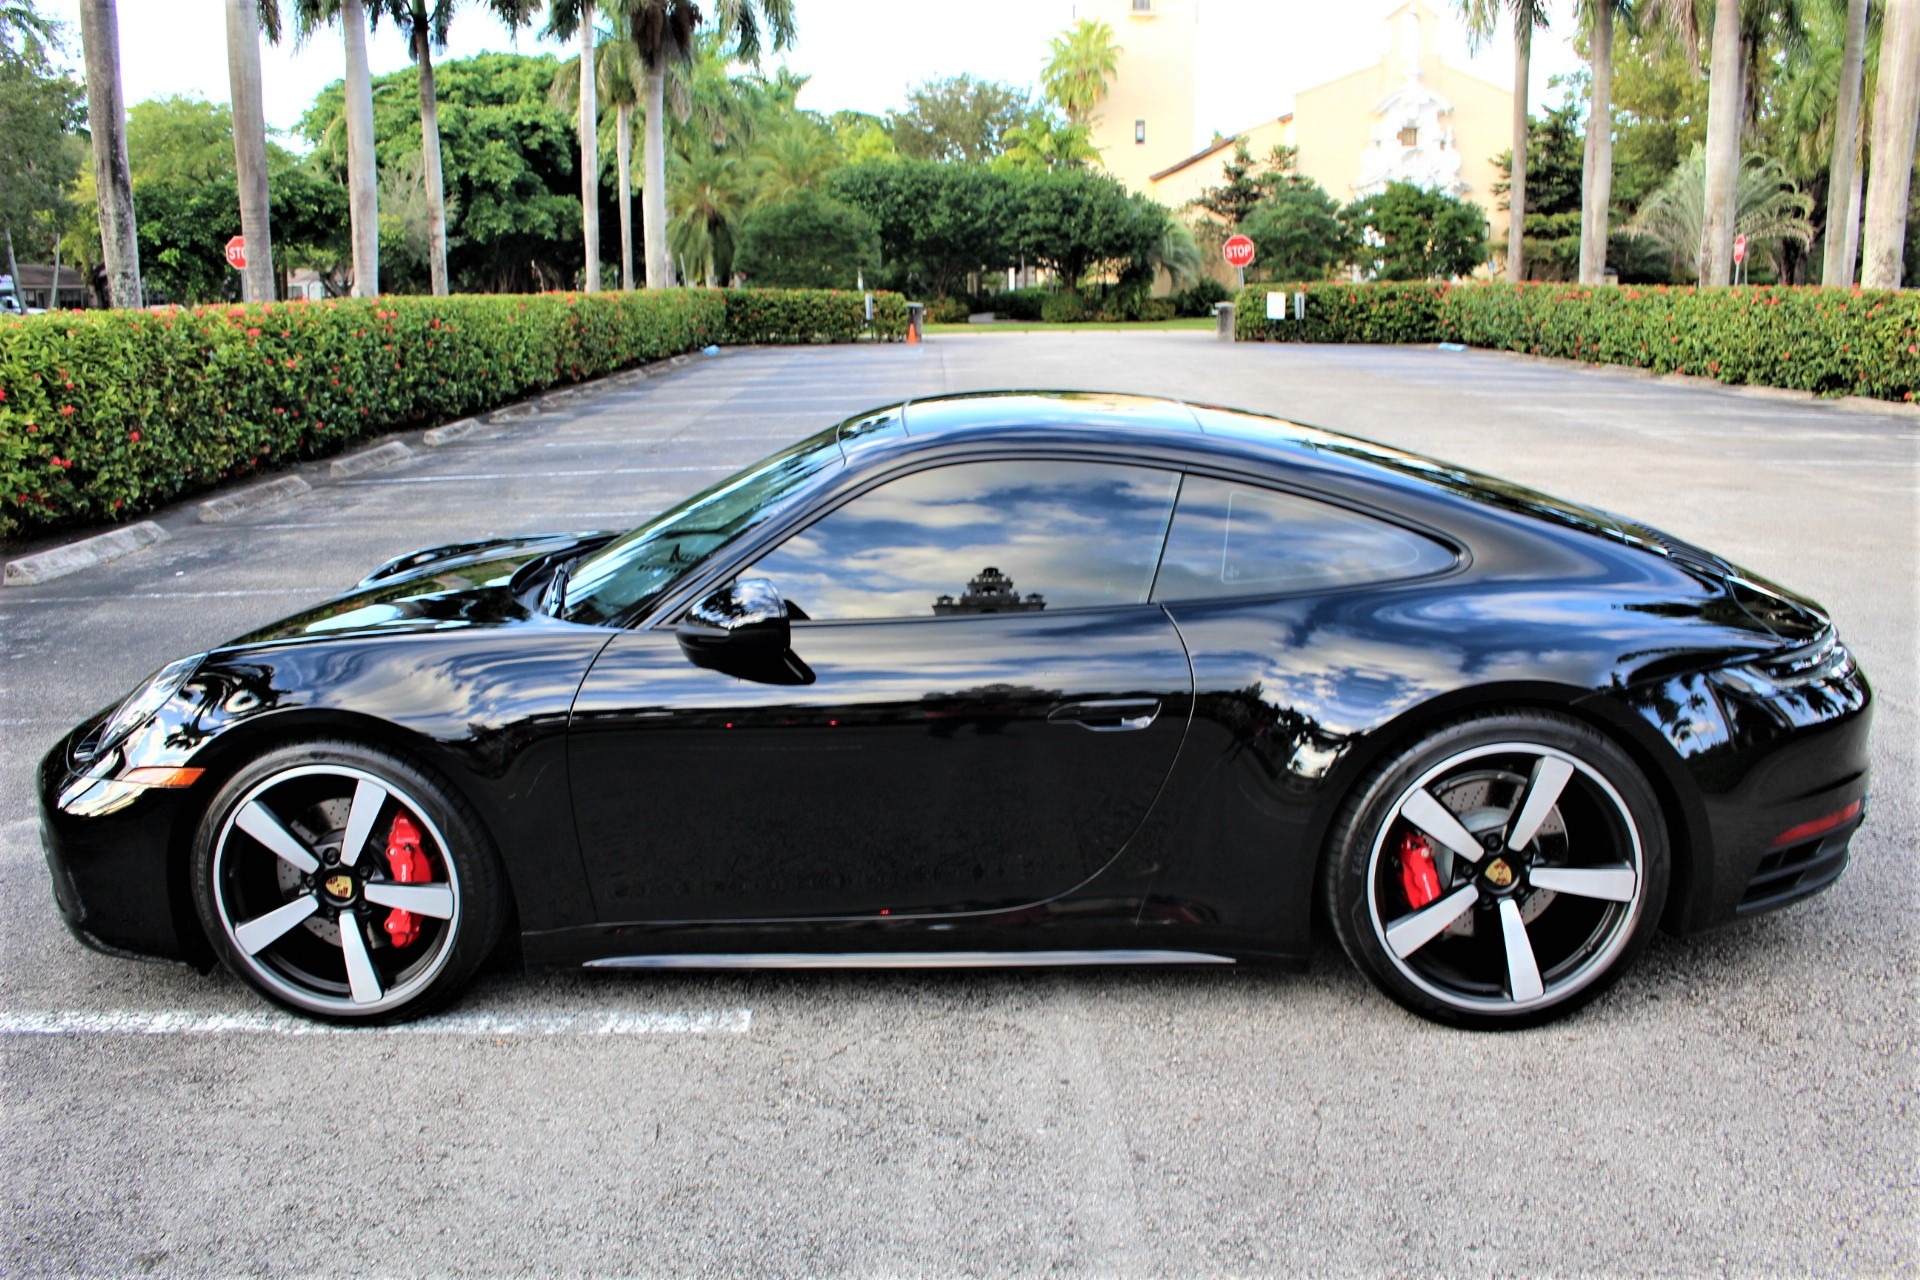 Used 2020 Porsche 911 Carrera 4S for sale Sold at The Gables Sports Cars in Miami FL 33146 3